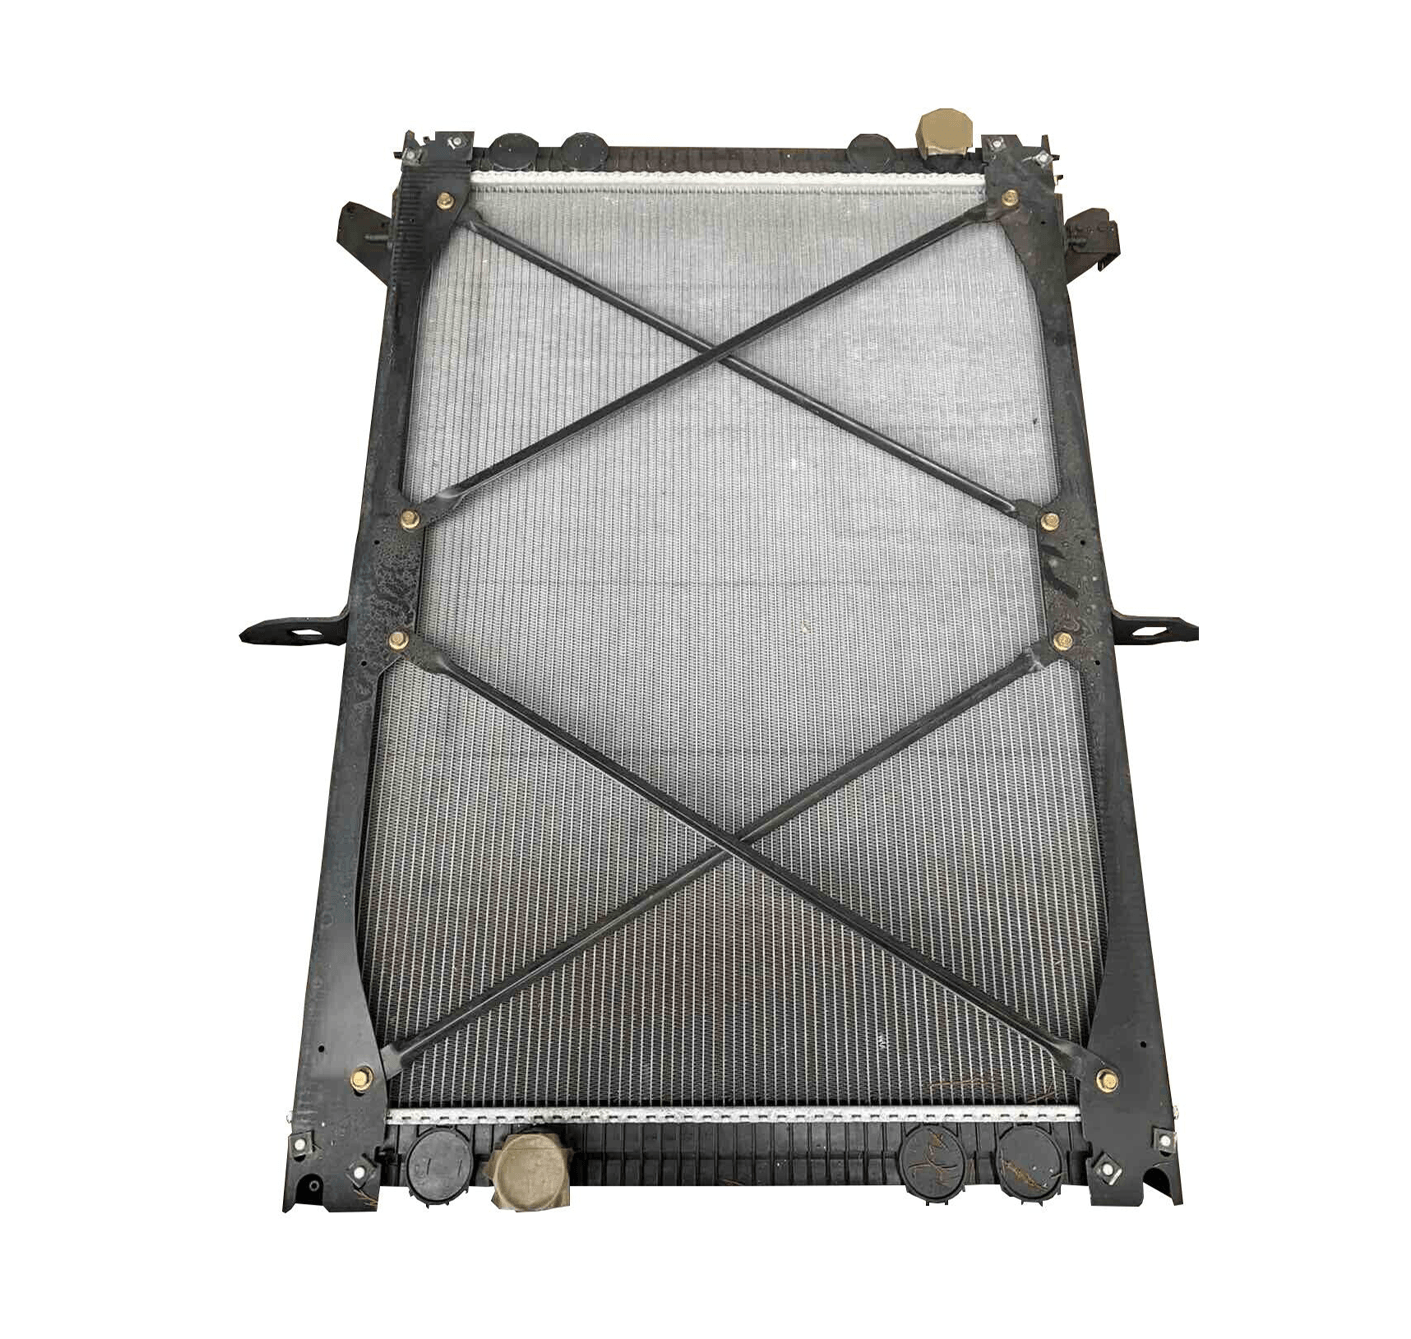 U3932002 Genuine Behr® Radiator For Freightliner With A Frame - ADVANCED TRUCK PARTS